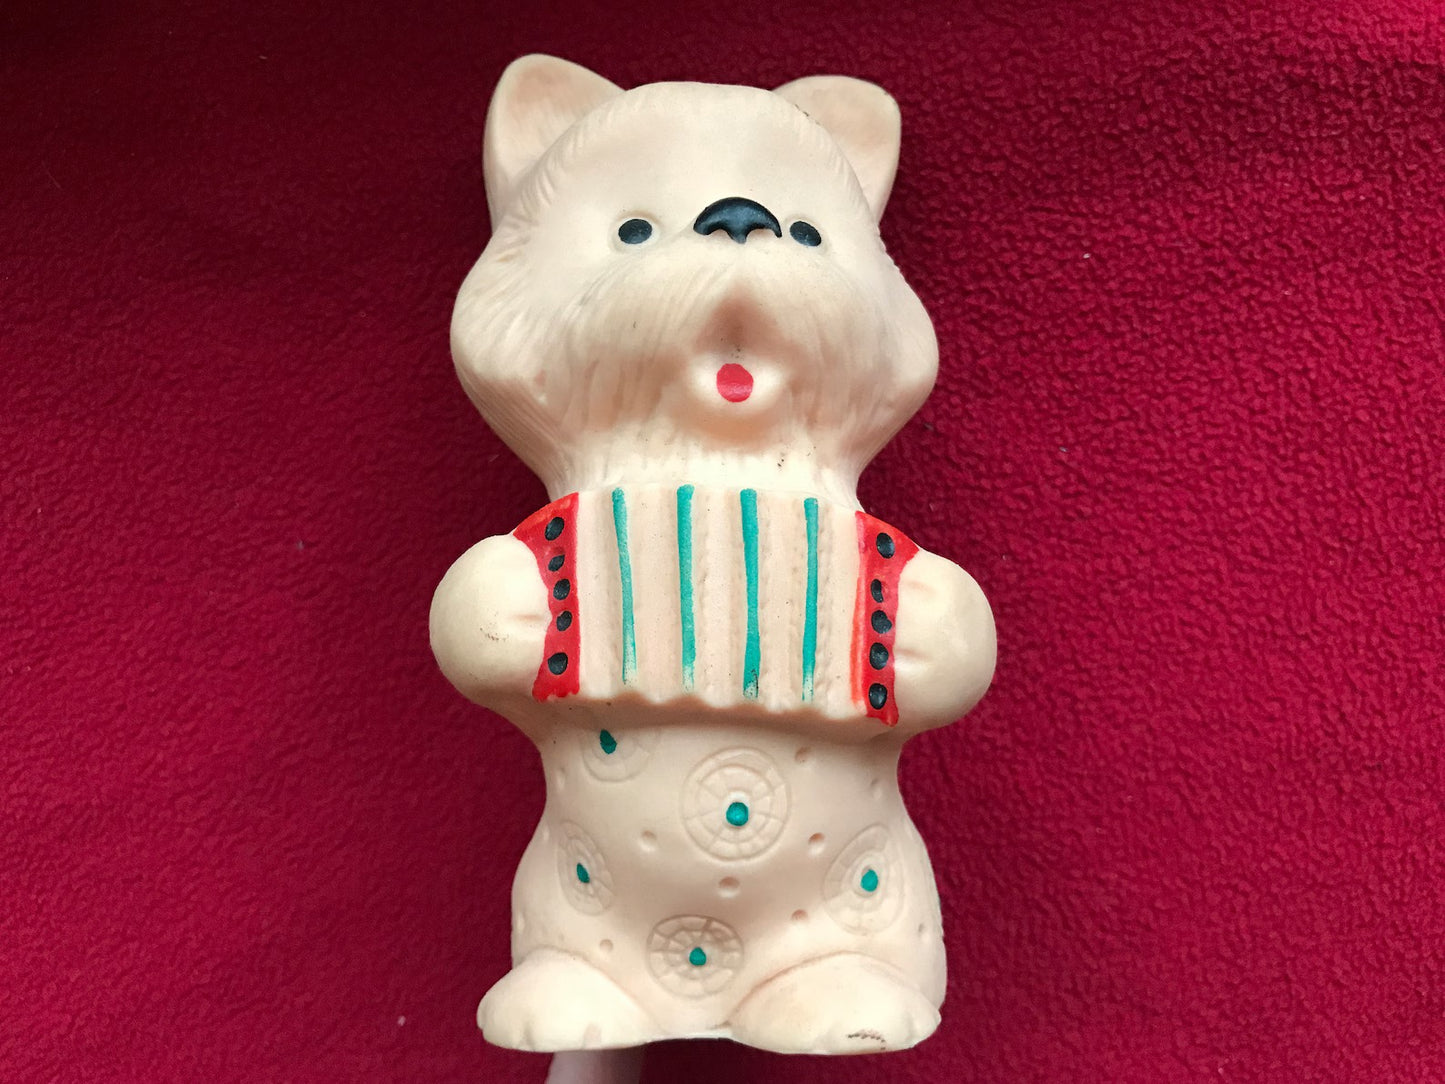 Rare find! Vintage 1970s rubber toy - CAT playing Garmon Karmoshka - Made in Soviet Union - Lovely USSR retro toy - Collectible vintage toy